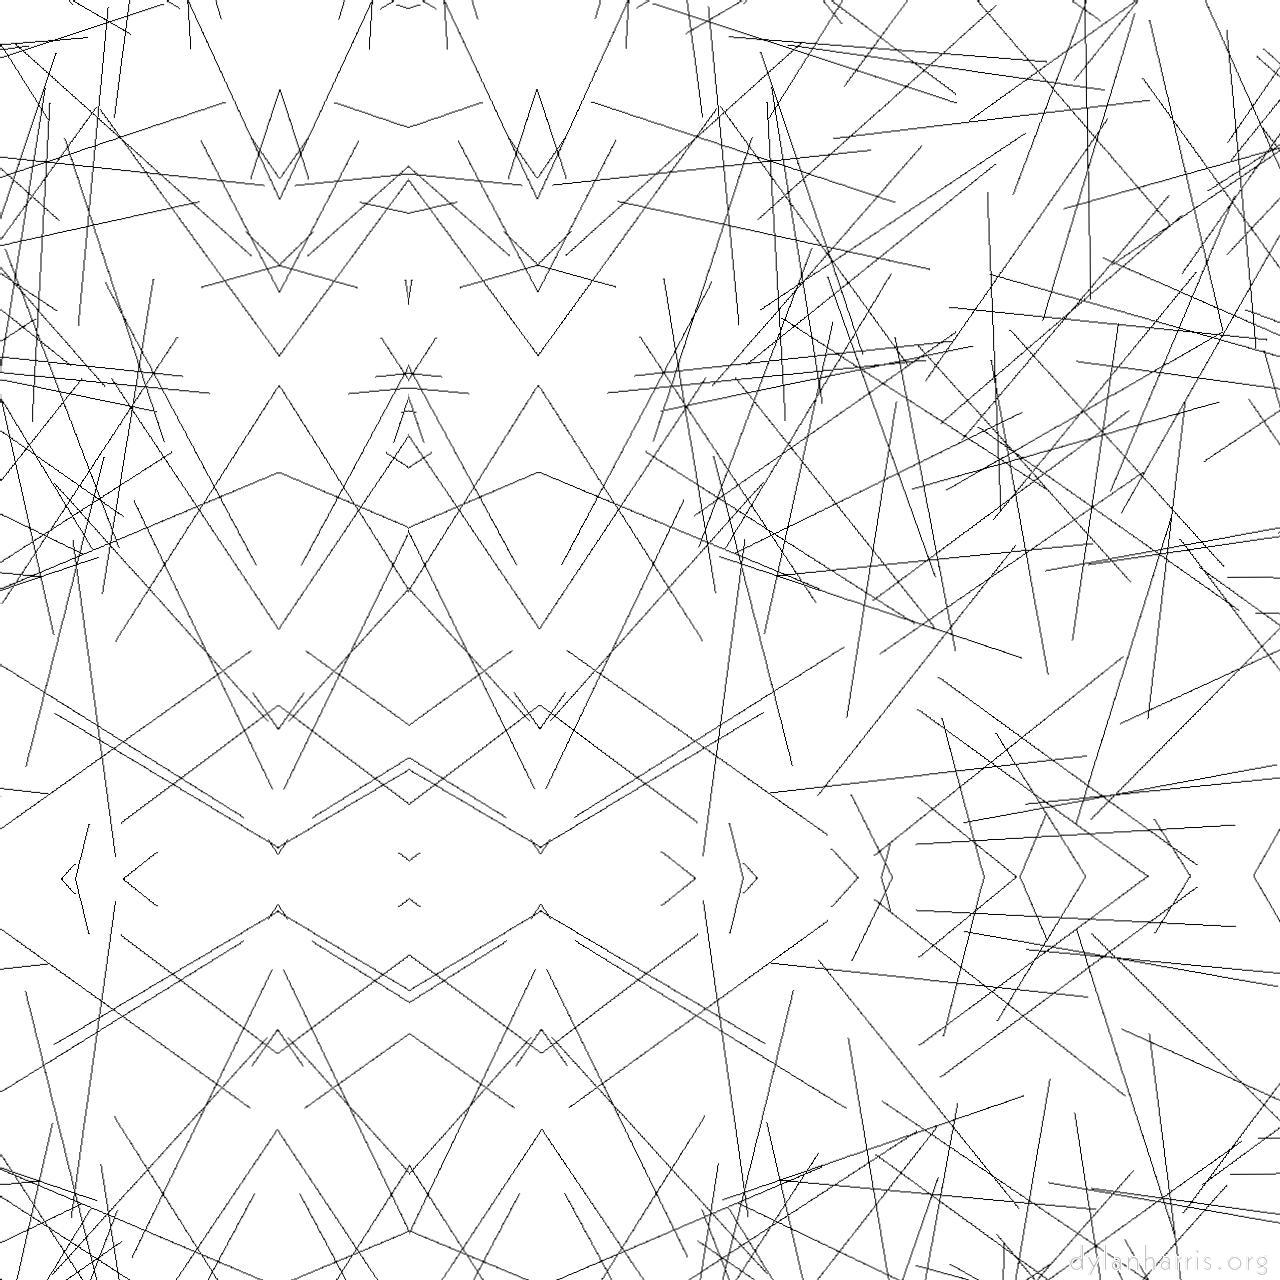 image: storage presets :: abstract line drawing 1